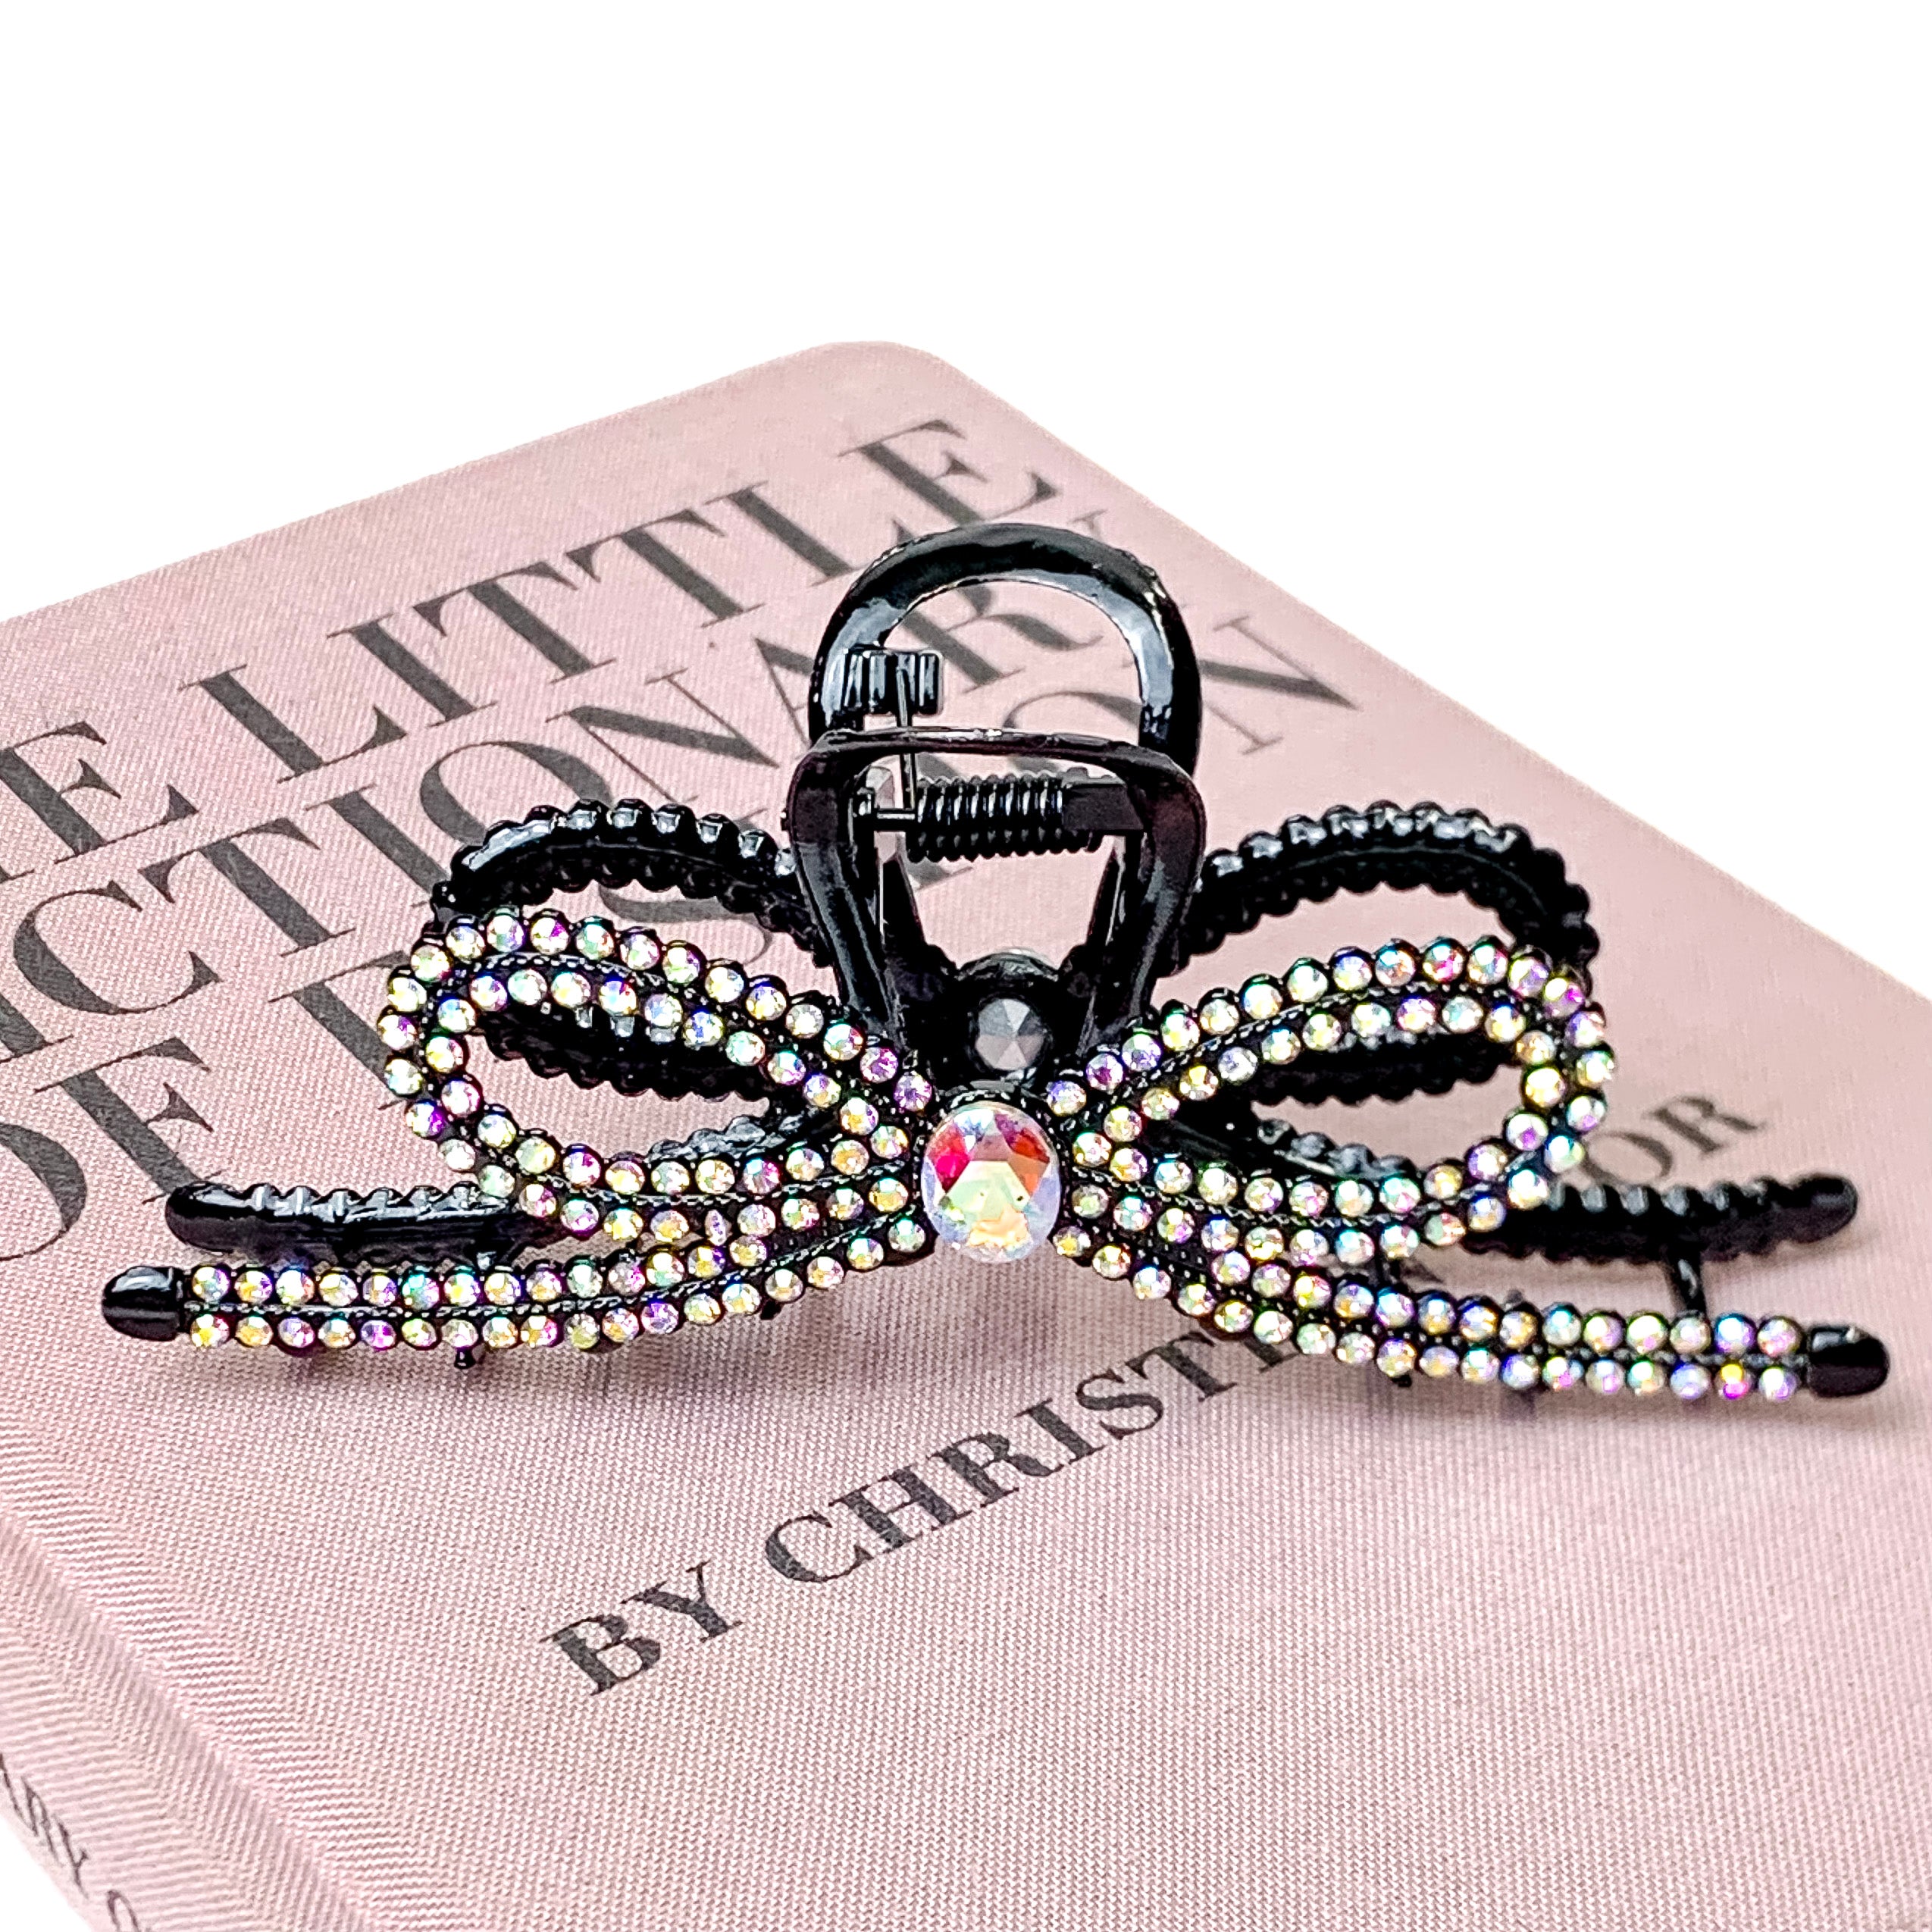 AB Crystal Embellished Metal Ribbon Shaped Metal Hair Clip in Black - Giddy Up Glamour Boutique